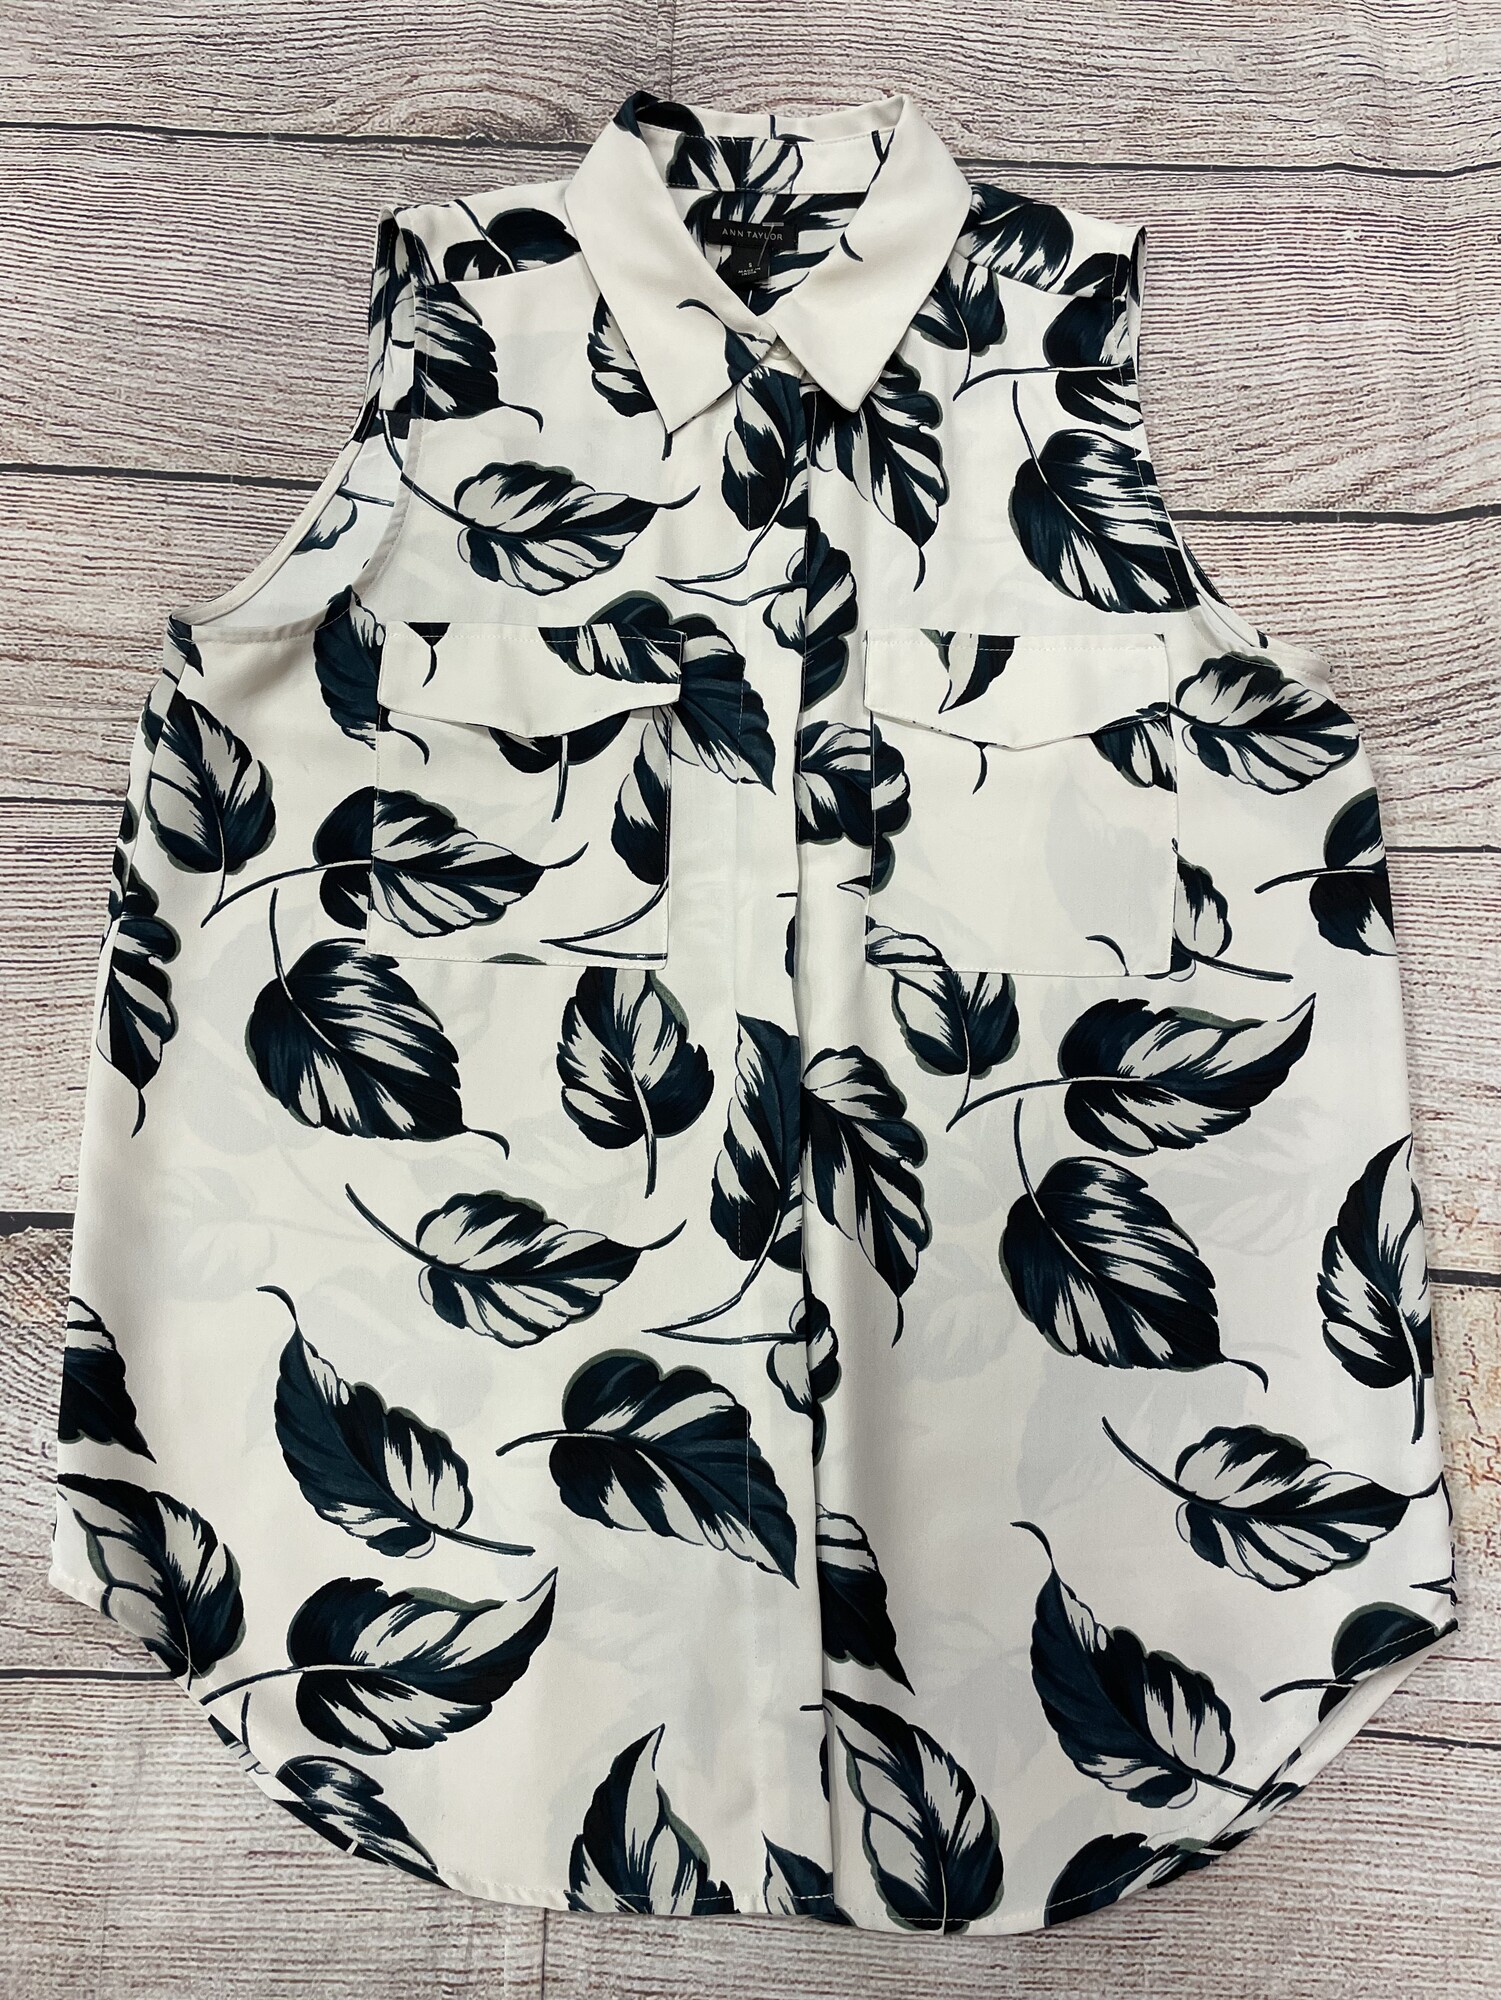 Ann Taylor Sleeveless Blouse, Cream with a Dark Teal Leaf Pattern, Front Pockets and a Hidden Button Up Front, Size: Small